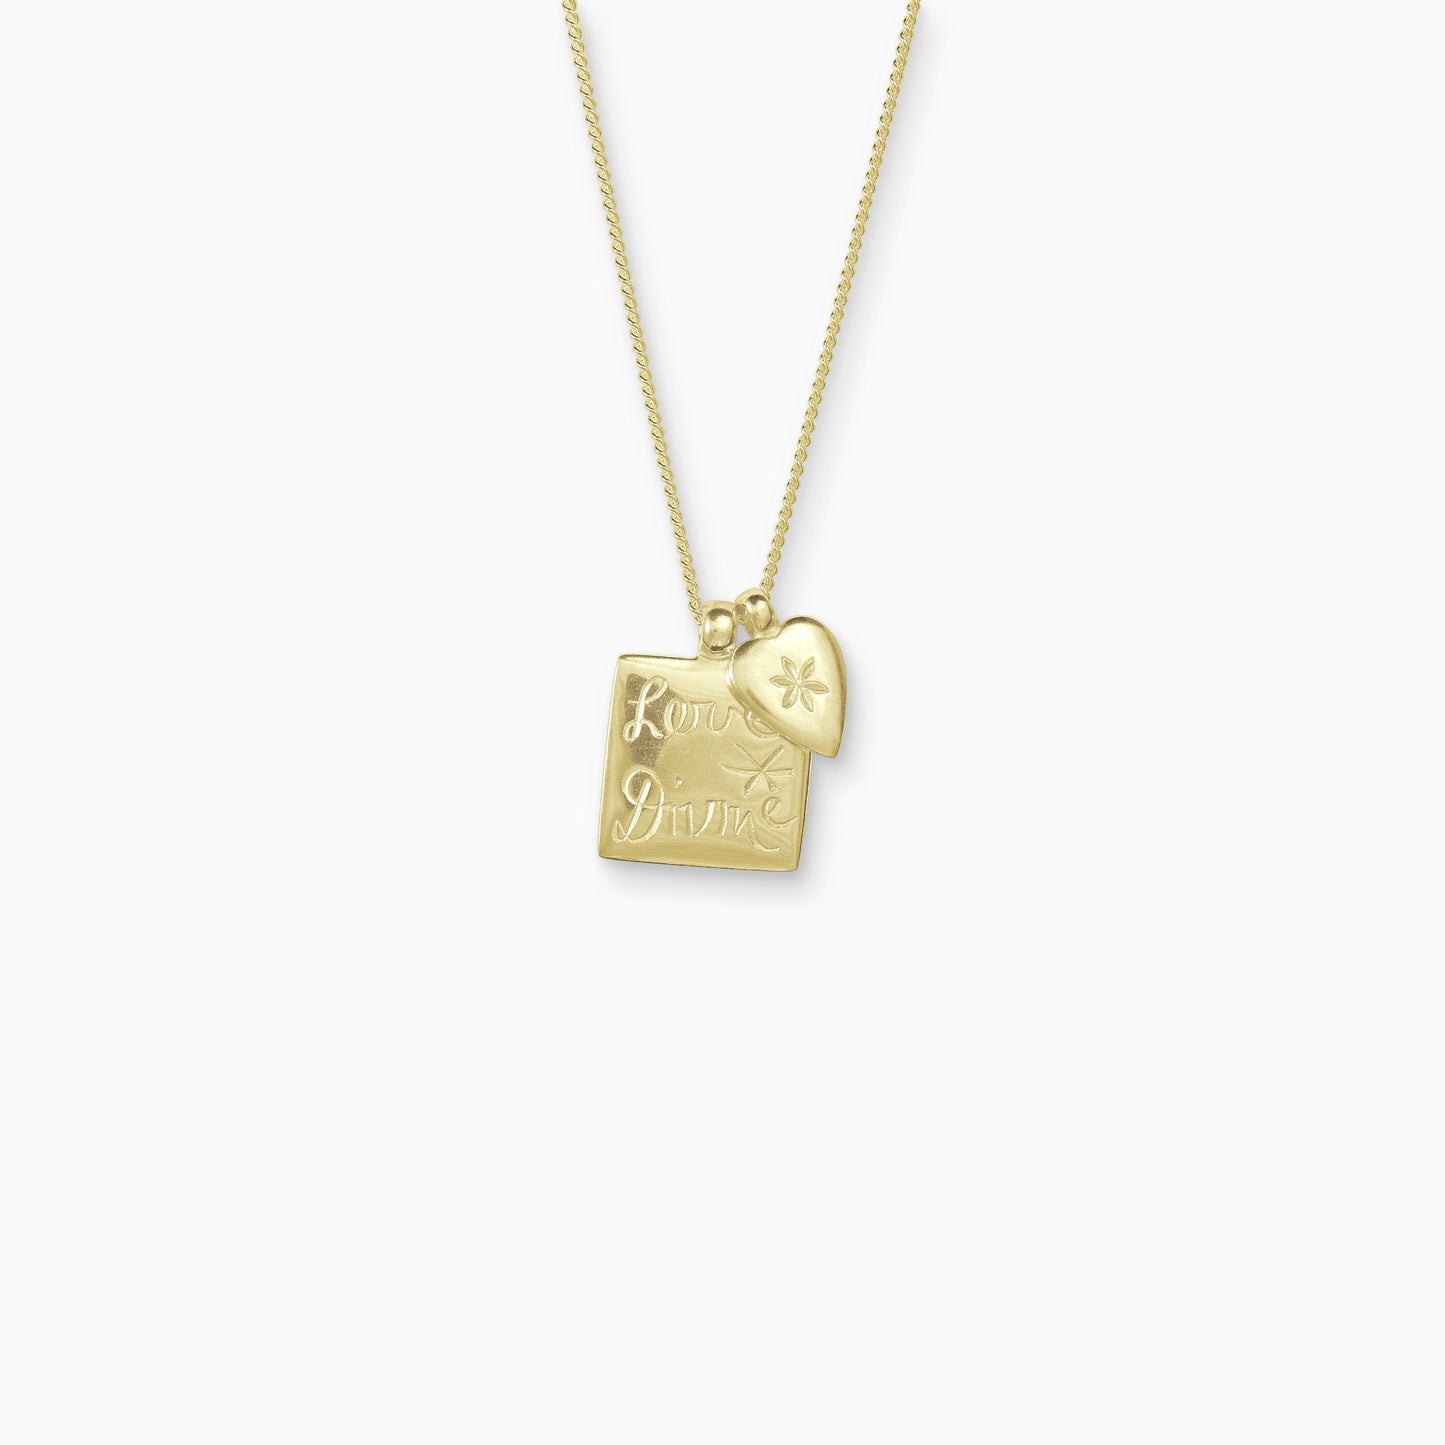 Love Divine and Flower Heart necklace